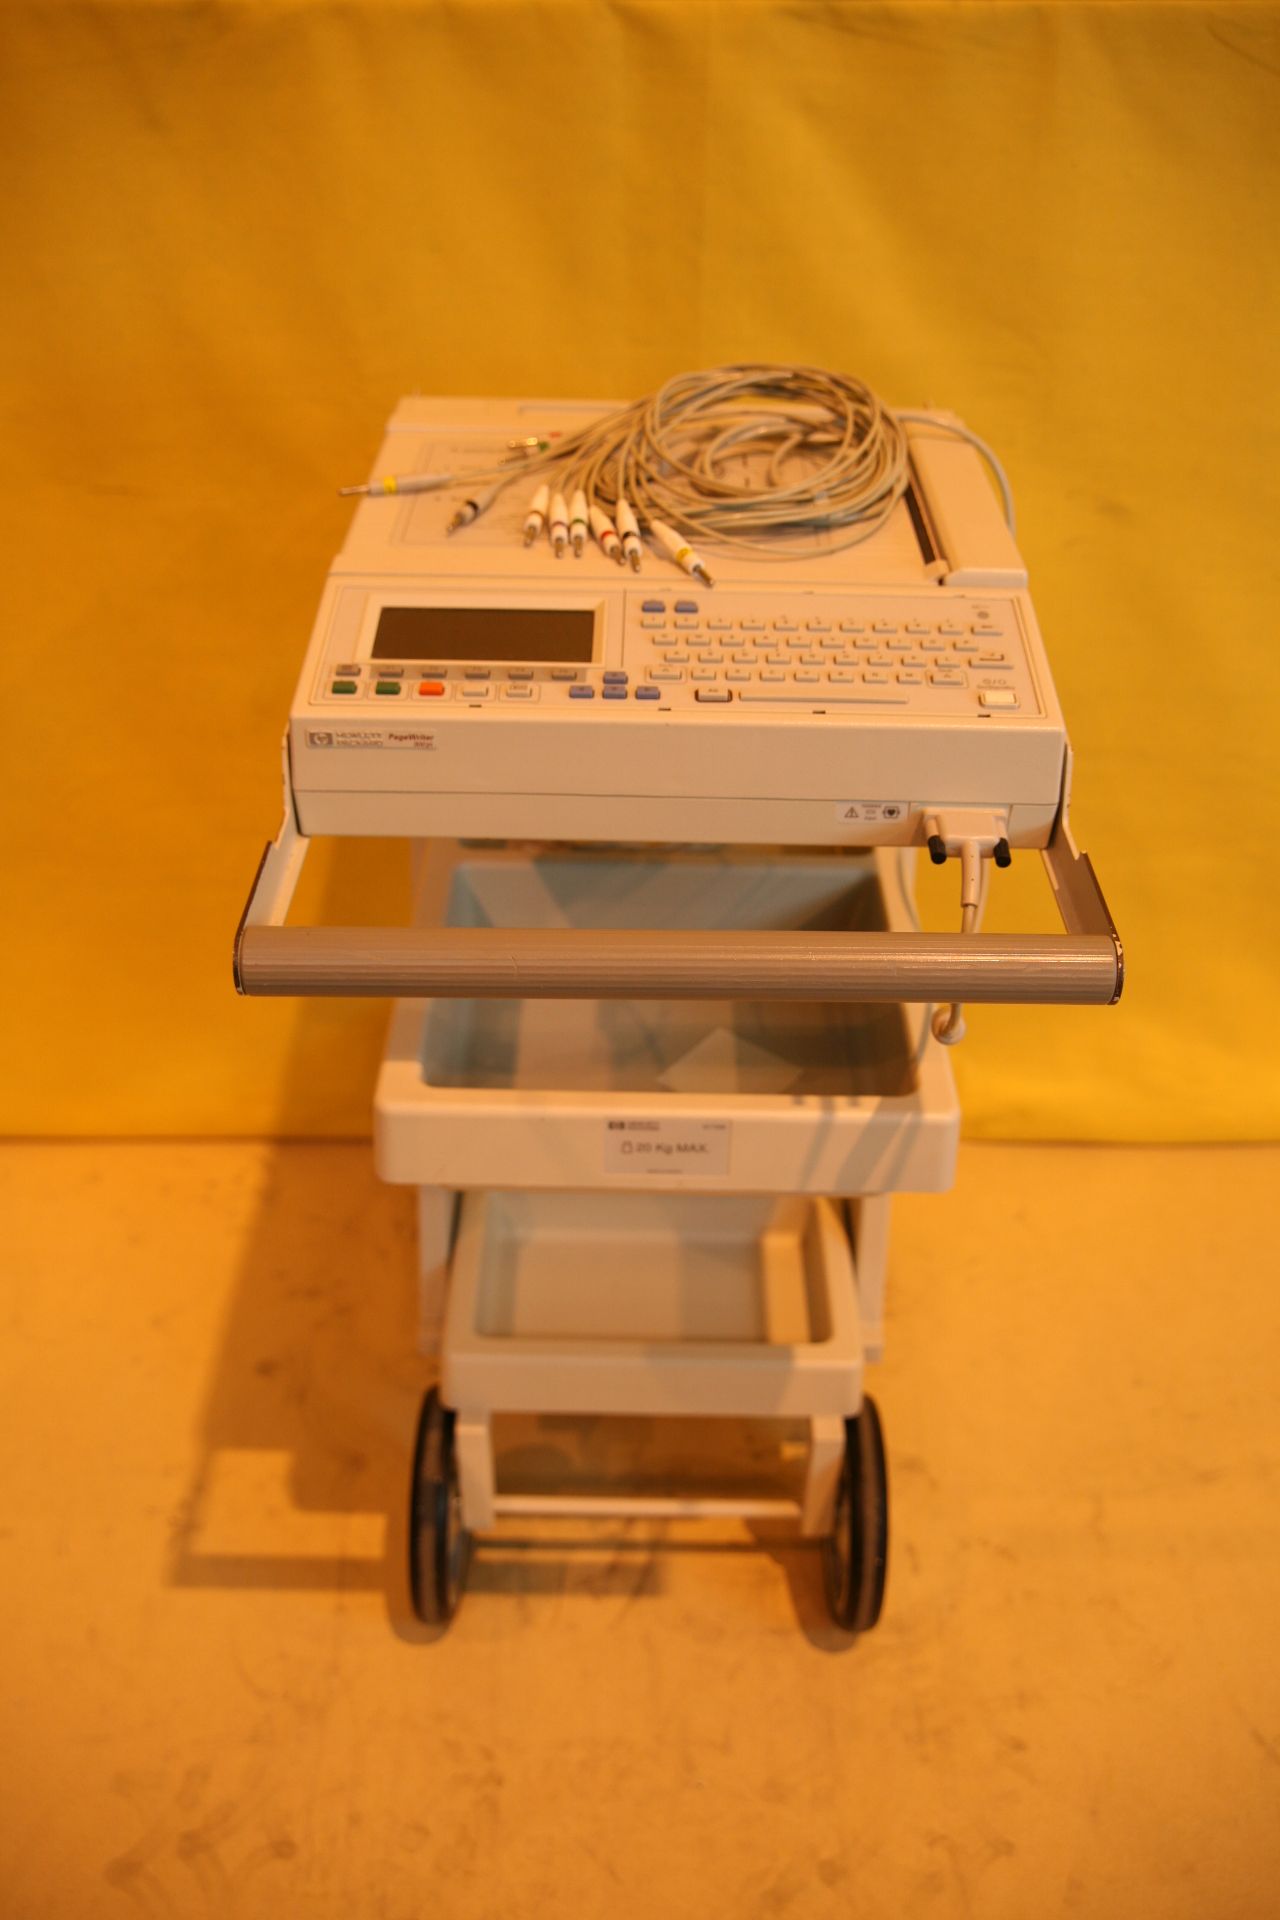 Philips Page Writer 300pi ECG Machine with ECG CABLE In Trolley